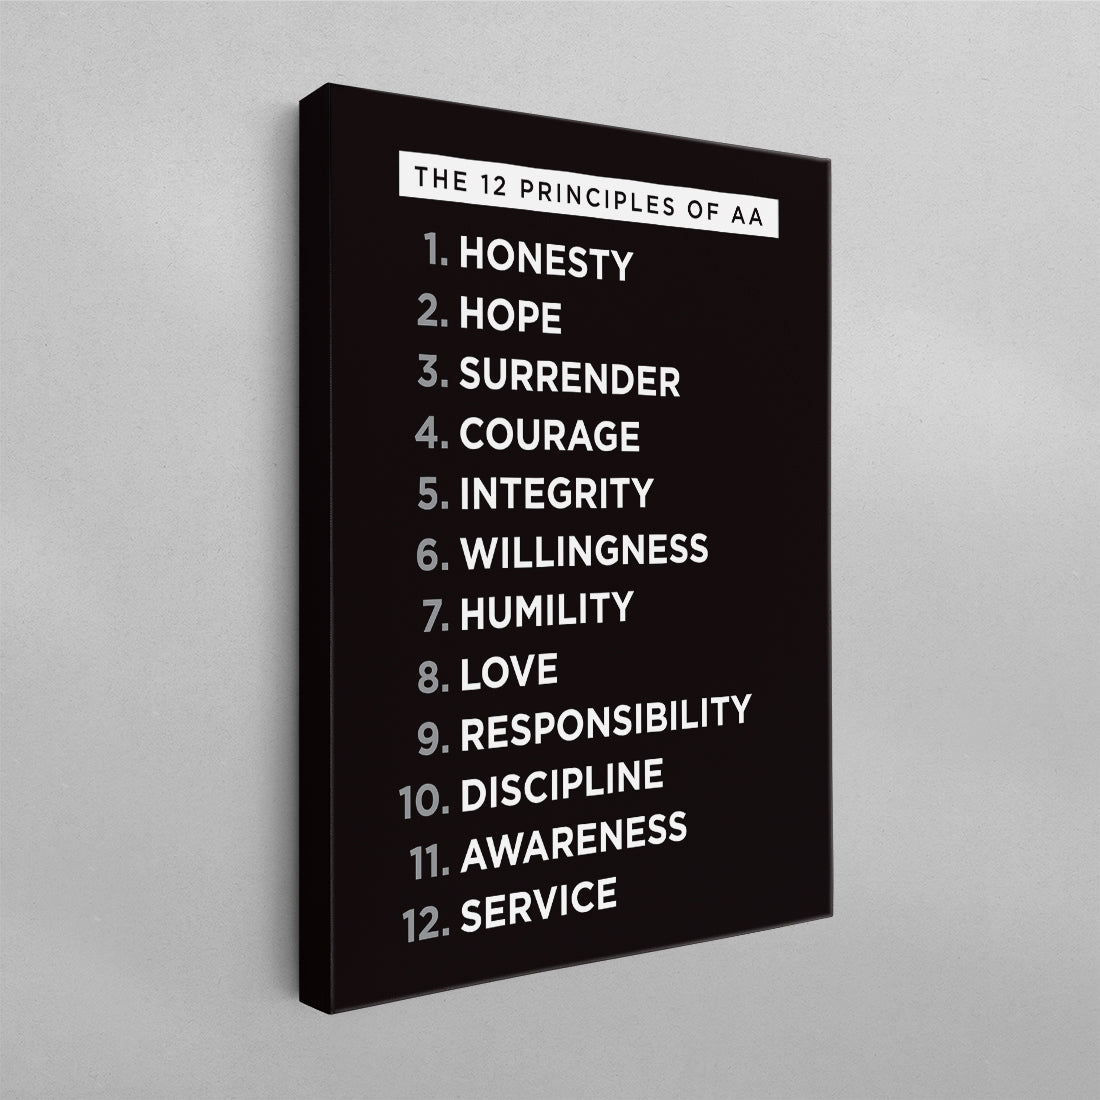 The 12 Principles of AA